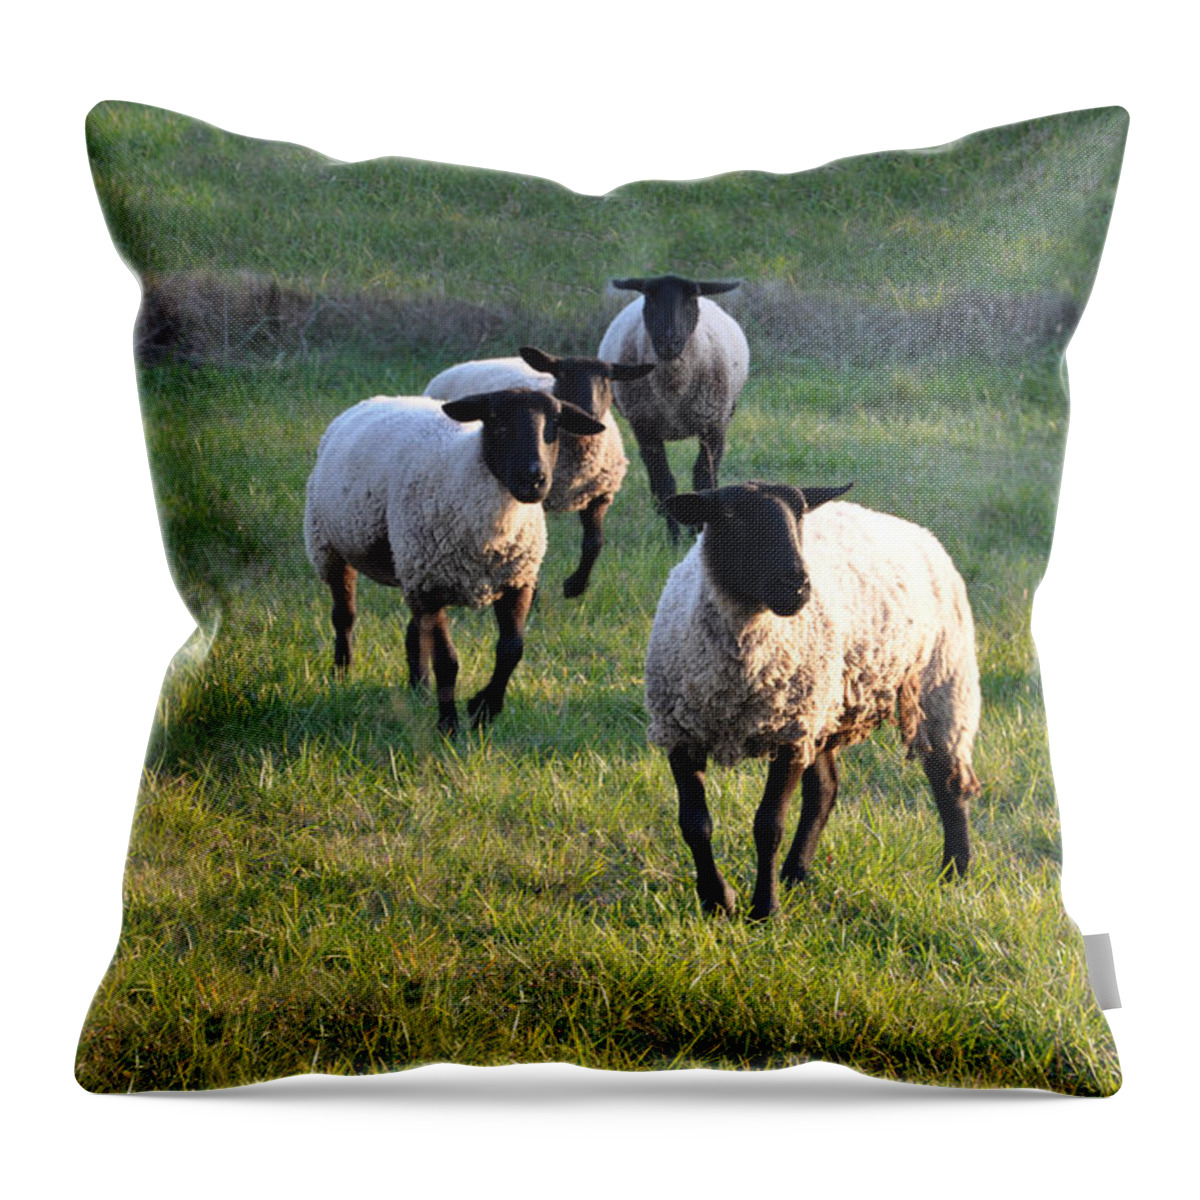 Animals Throw Pillow featuring the photograph Fancy Free by Jan Amiss Photography